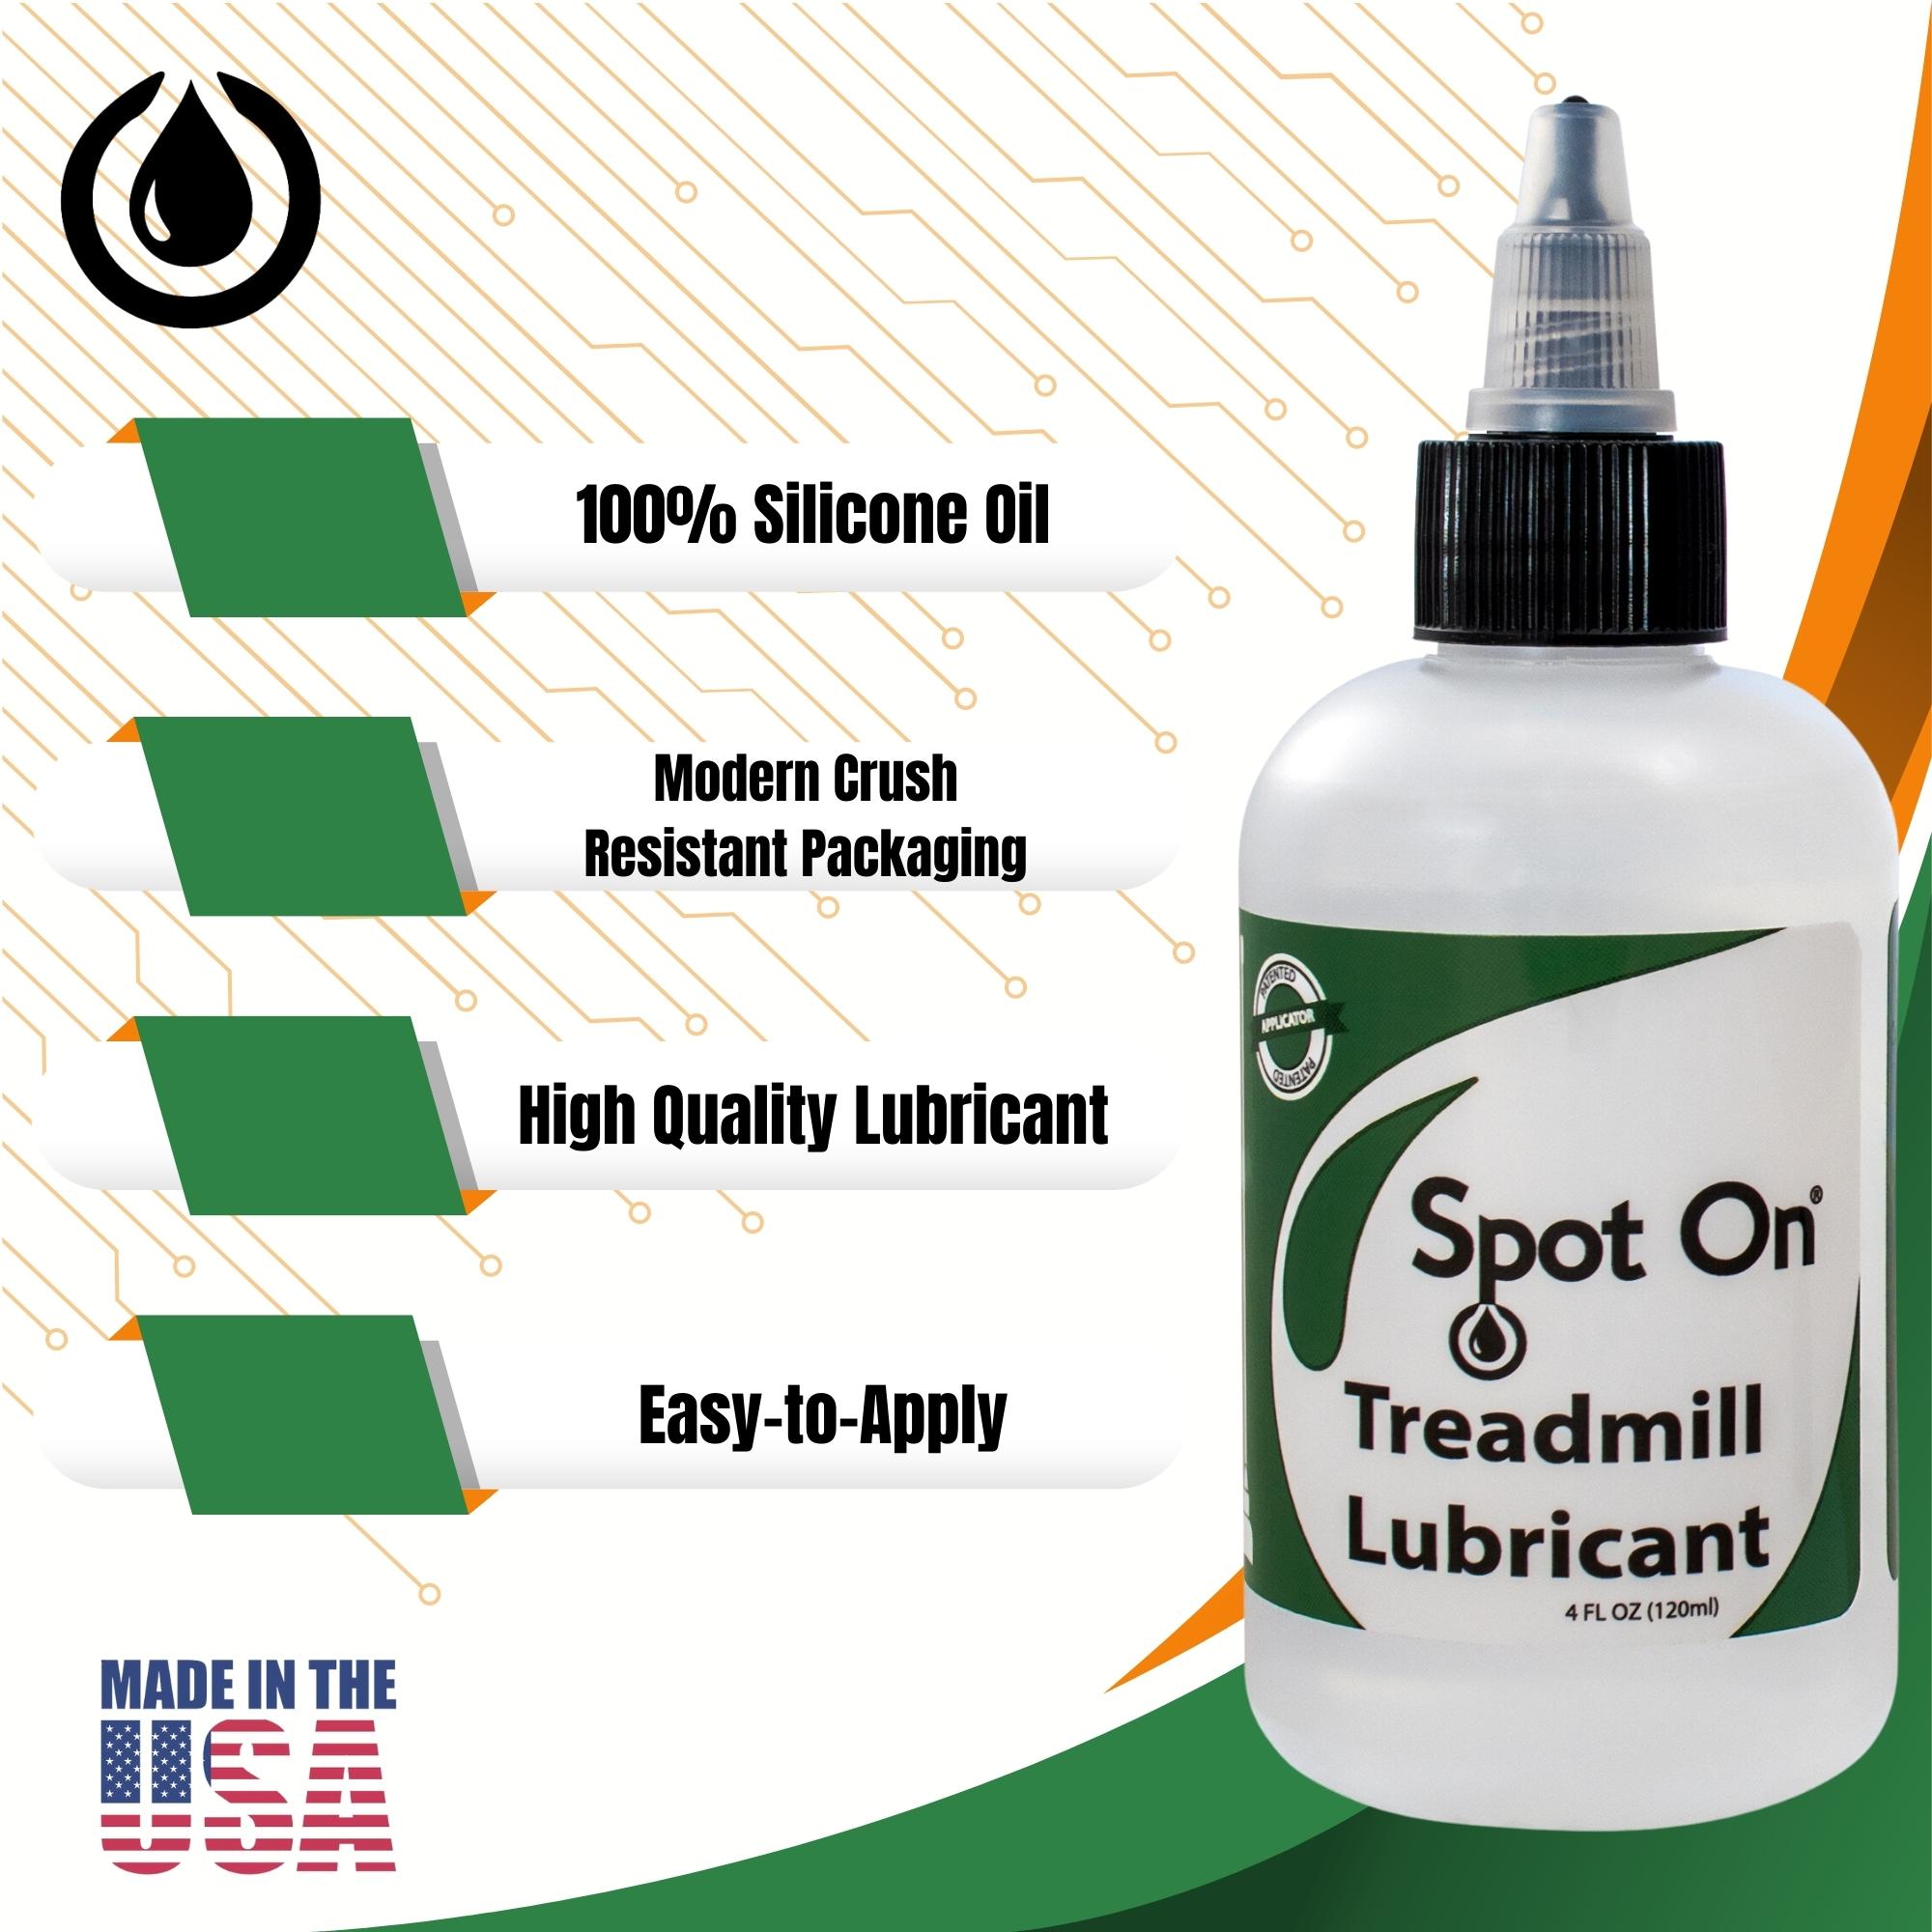 Spot On 100% Silicone Oil Treadmill Belt Lubricant Easy Squeeze Bottle, 4 fl oz - image 2 of 6